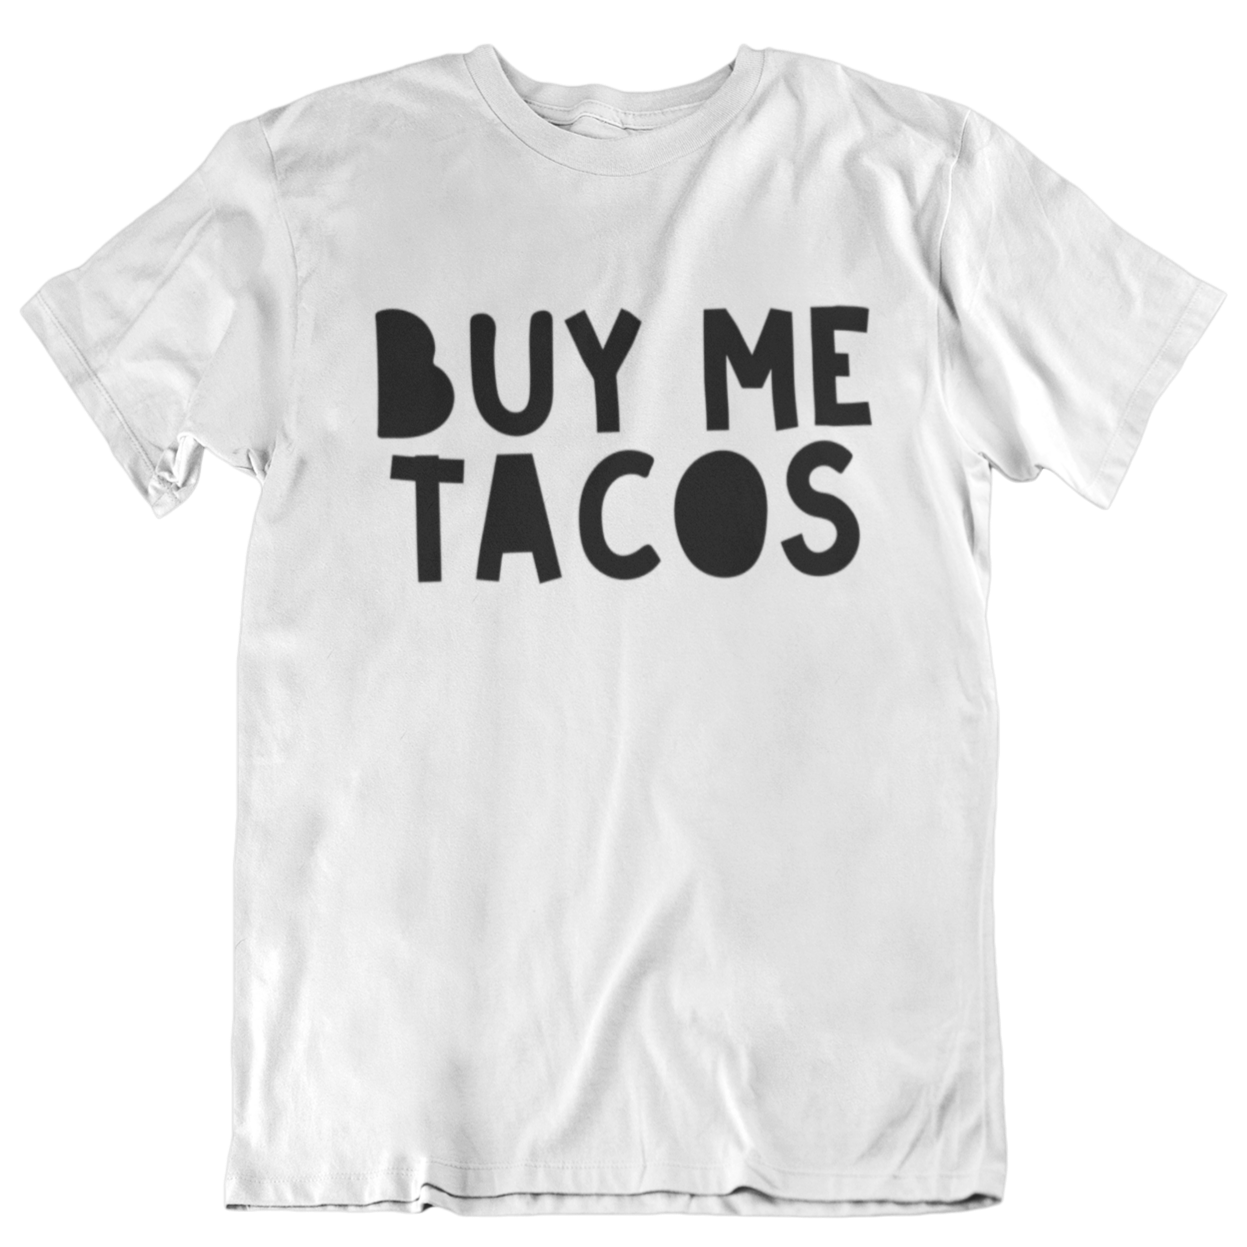 A mens white t-shirt with bold hand-drawn lettering that reads 'buy me tacos'